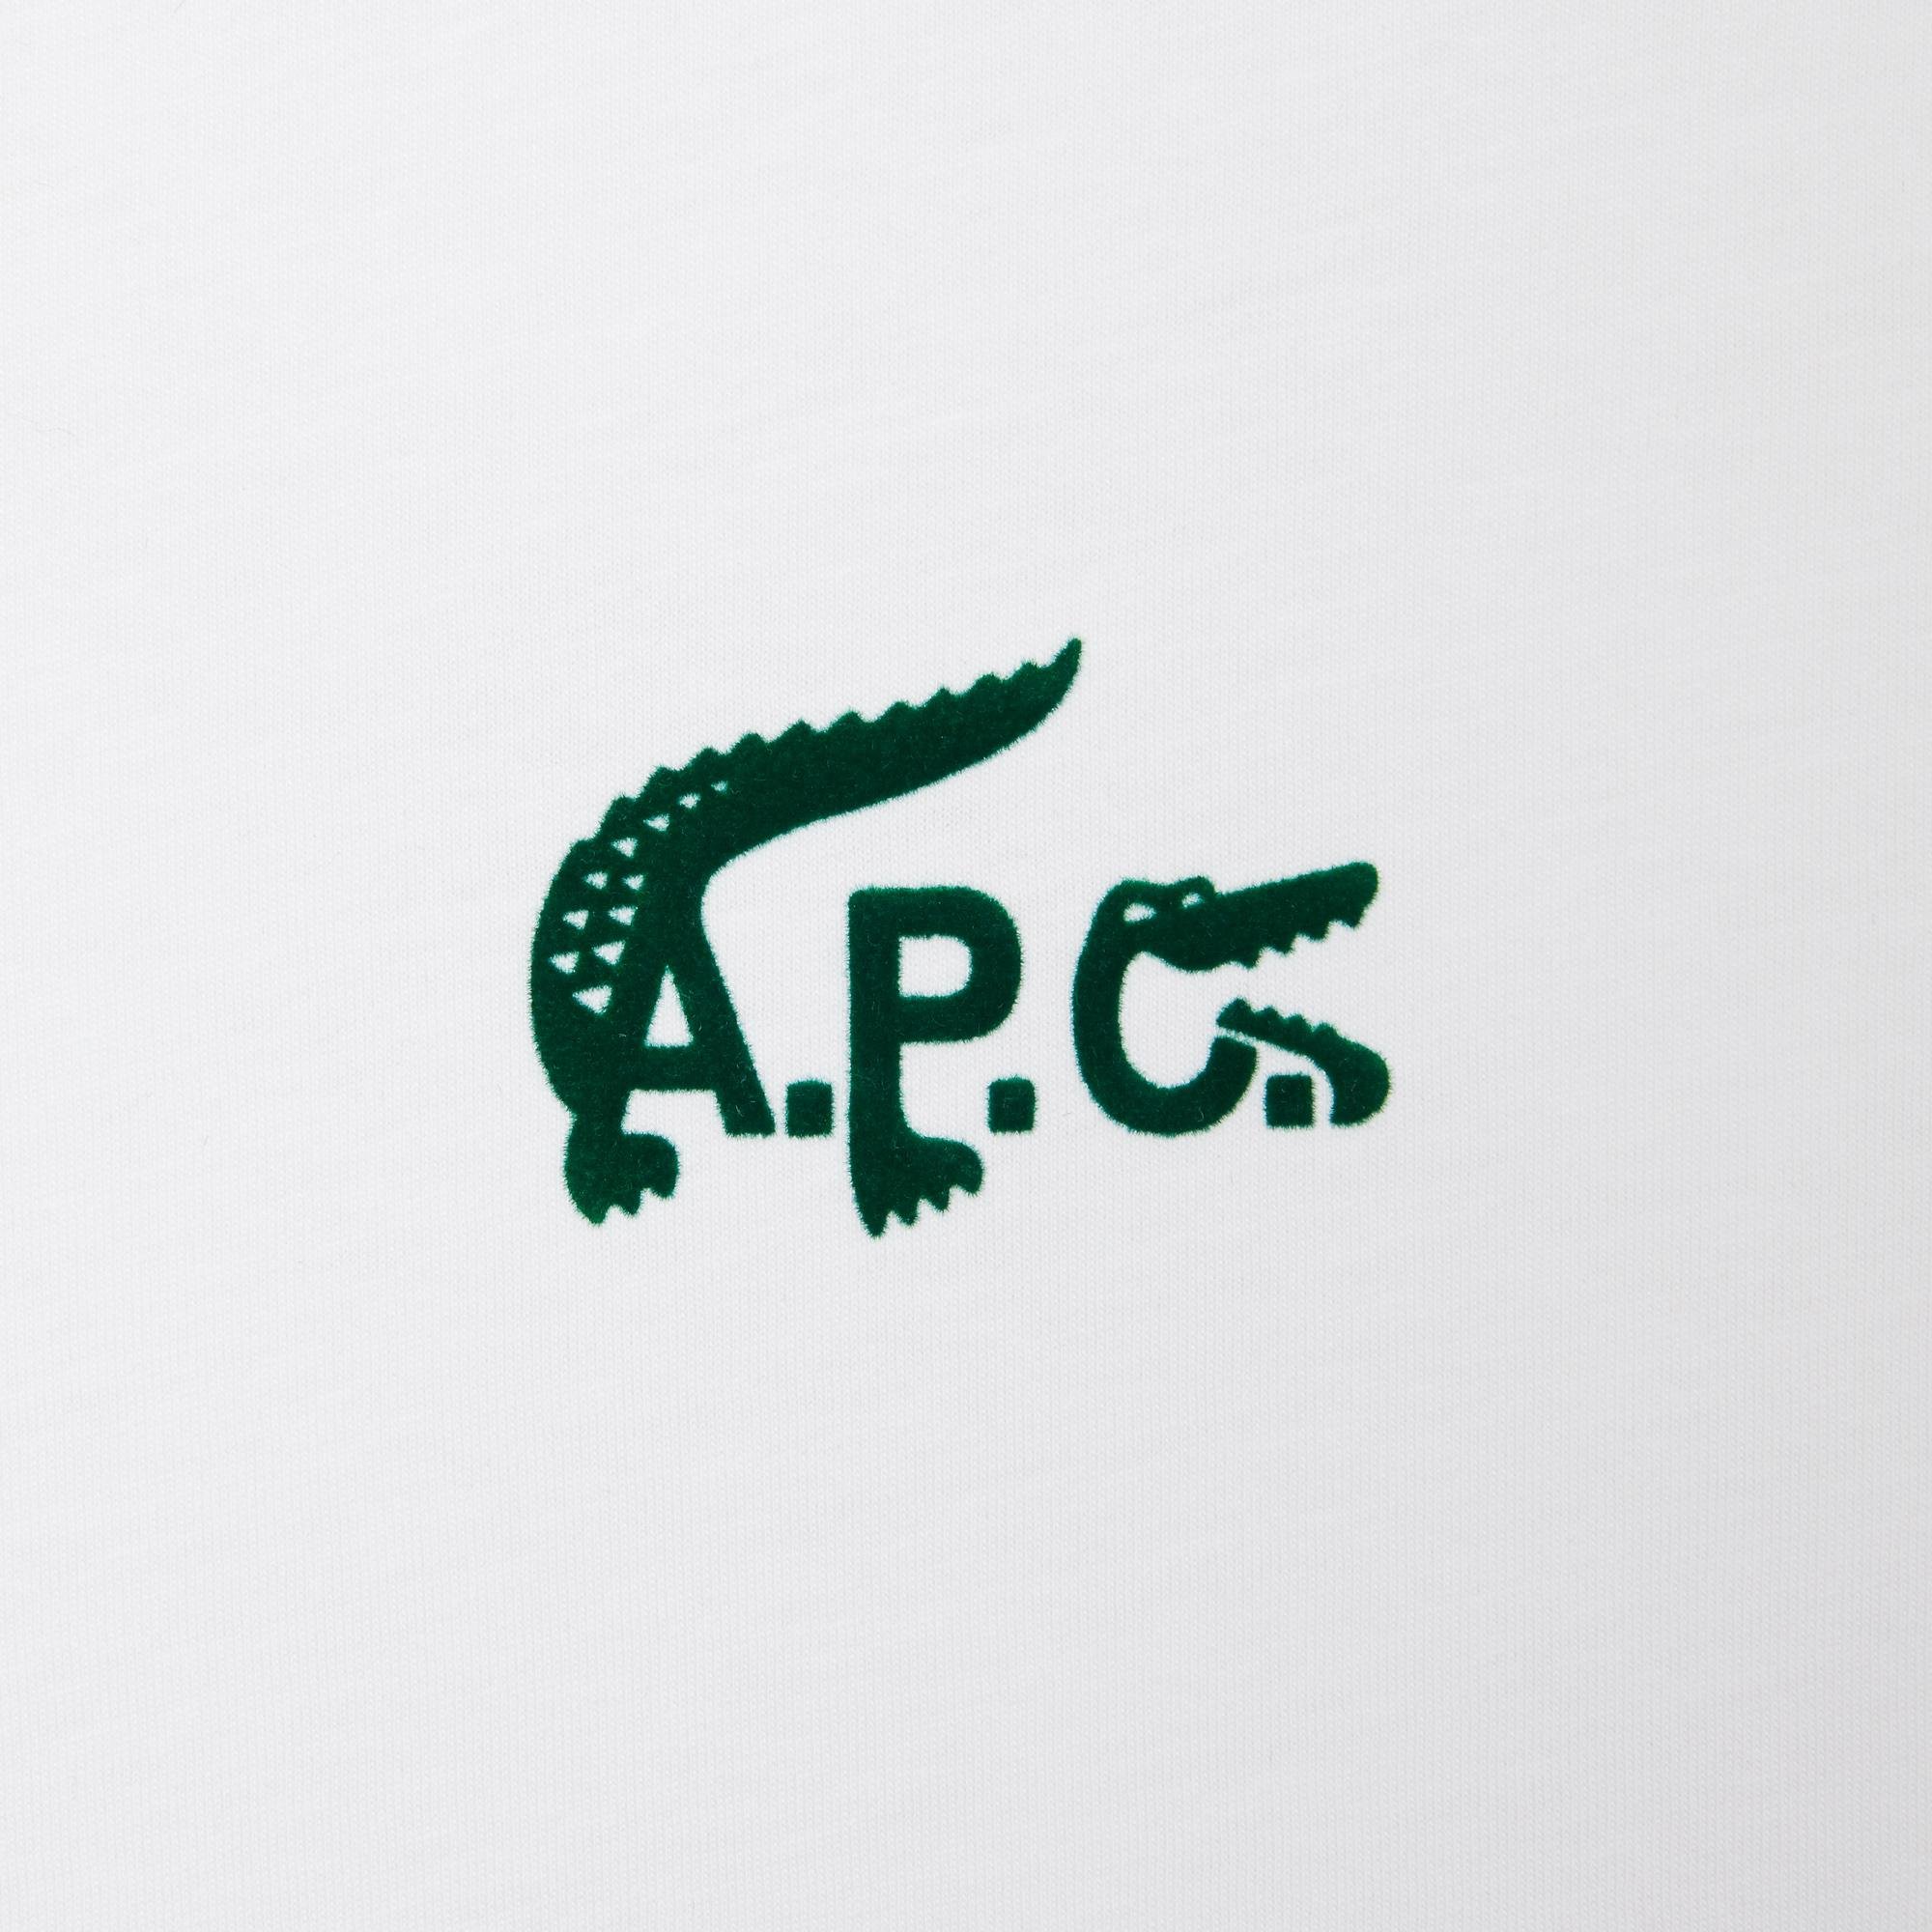 Lacoste X A.P.C Unisex Relaxed Fit Bisiklet Yaka Beyaz T-Shirt